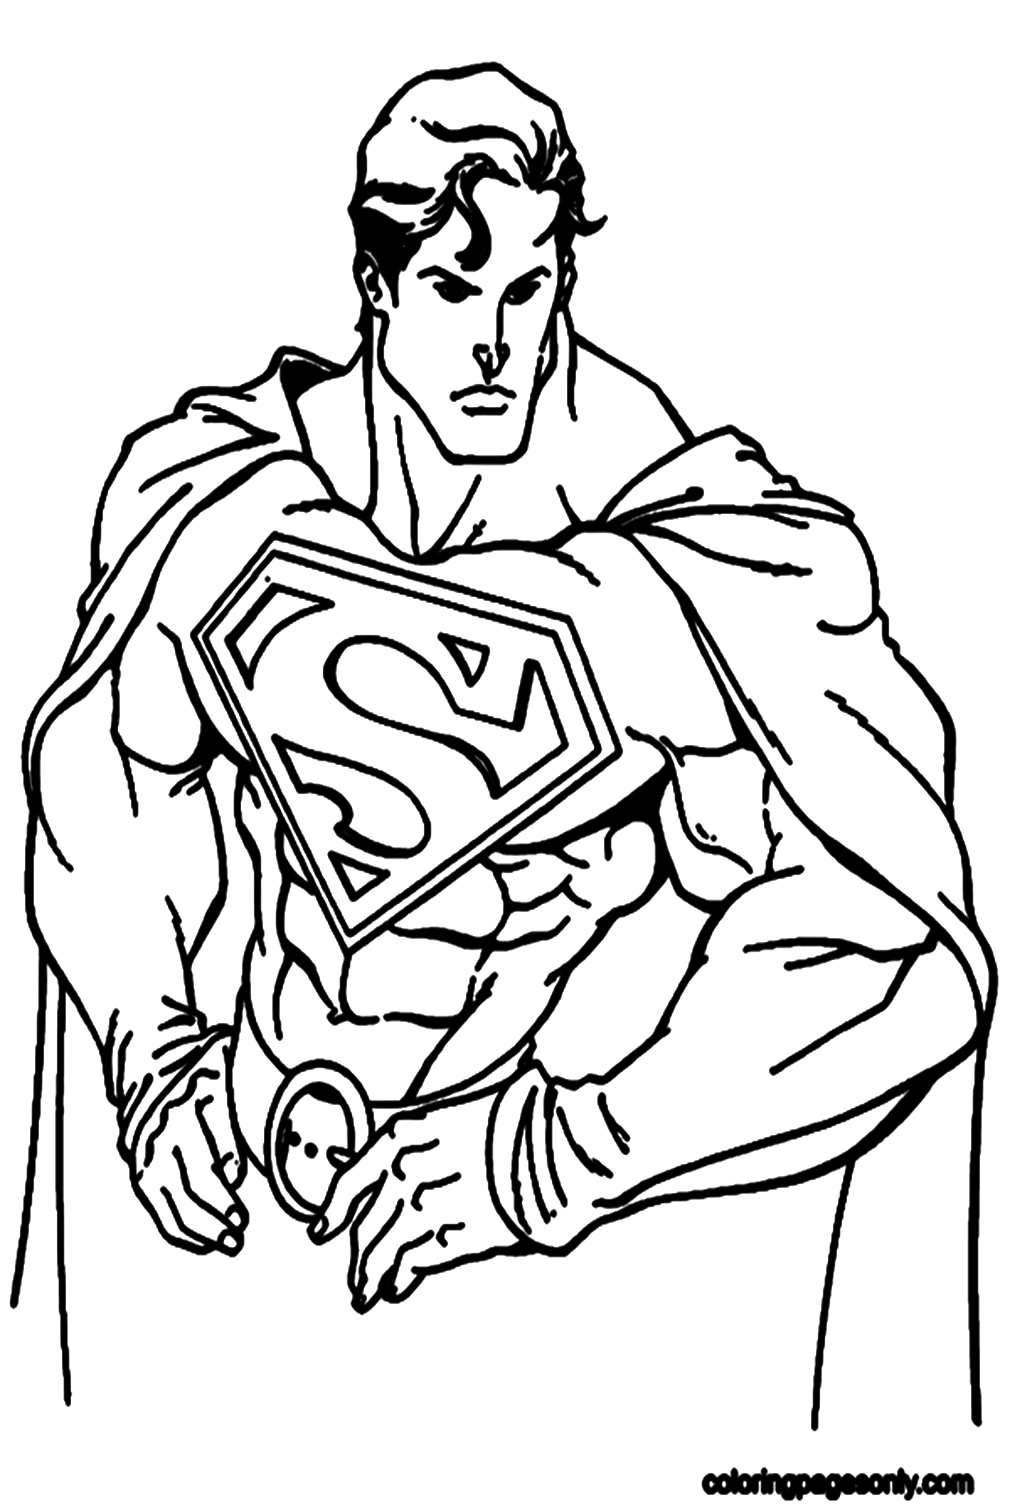 Superman Classic Coloring Page